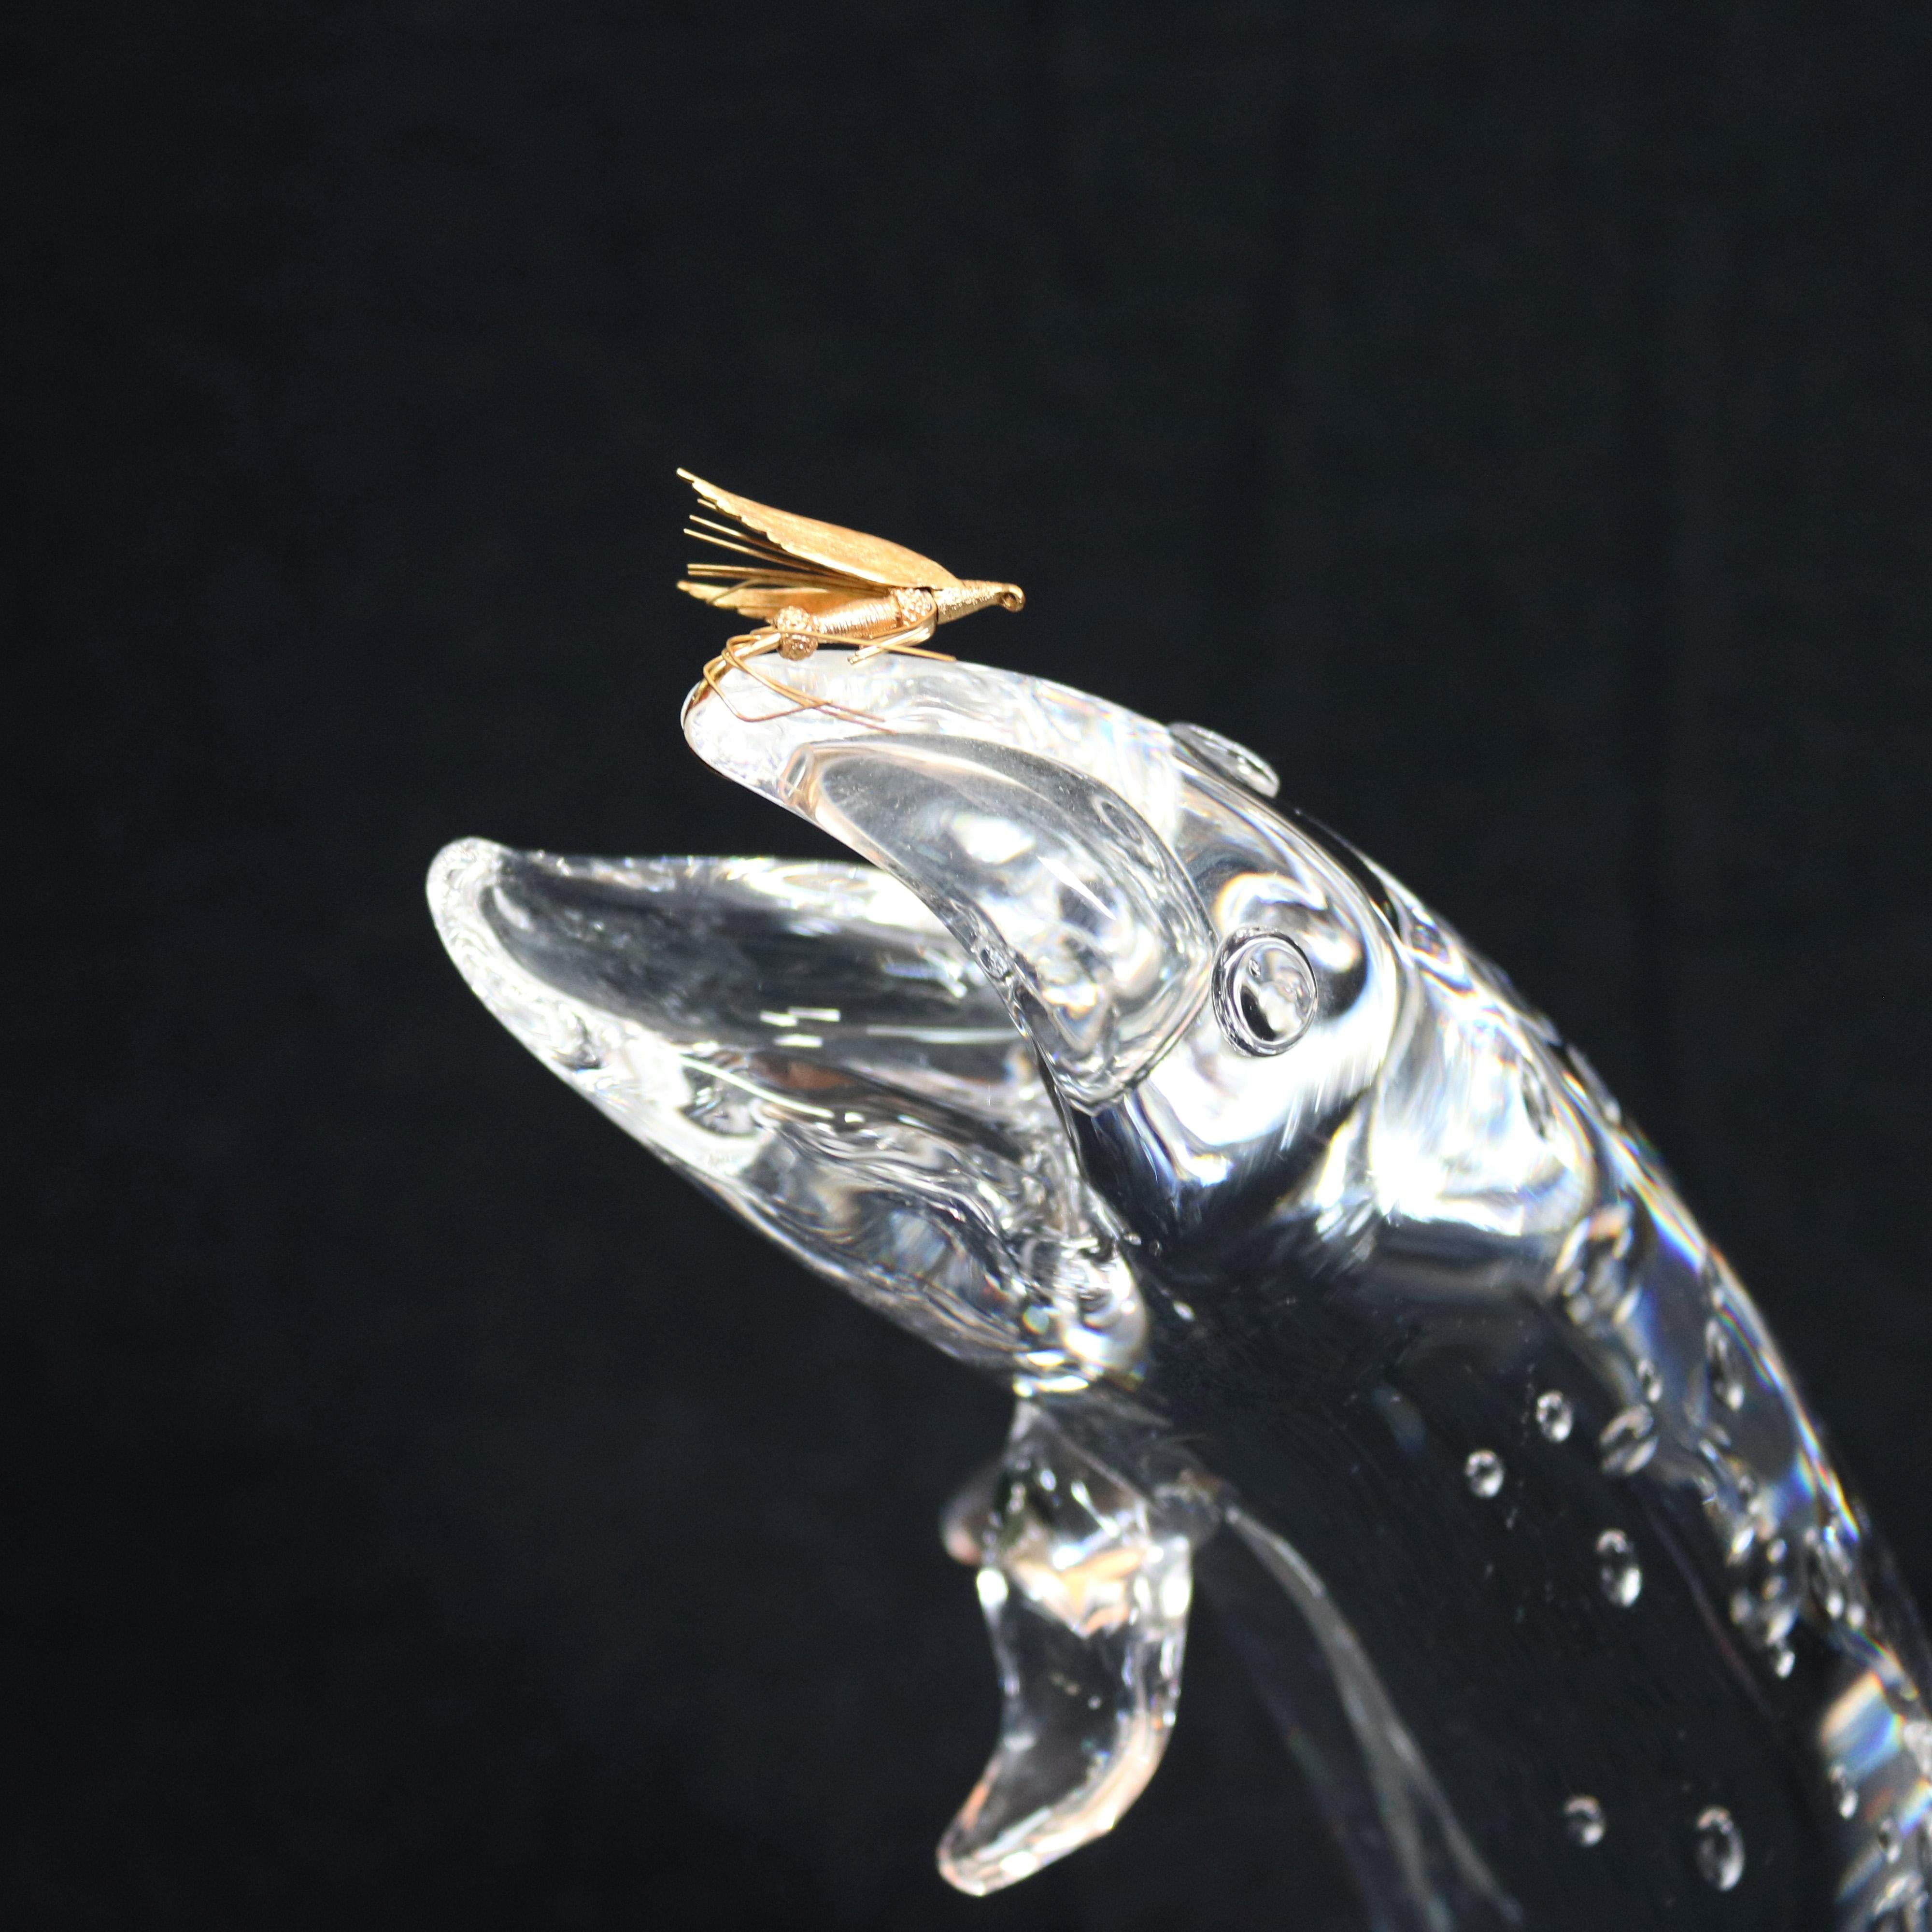 American Steuben Figurative Crystal and Gold Sculpture Paperweight, Trout & Fly, Signed